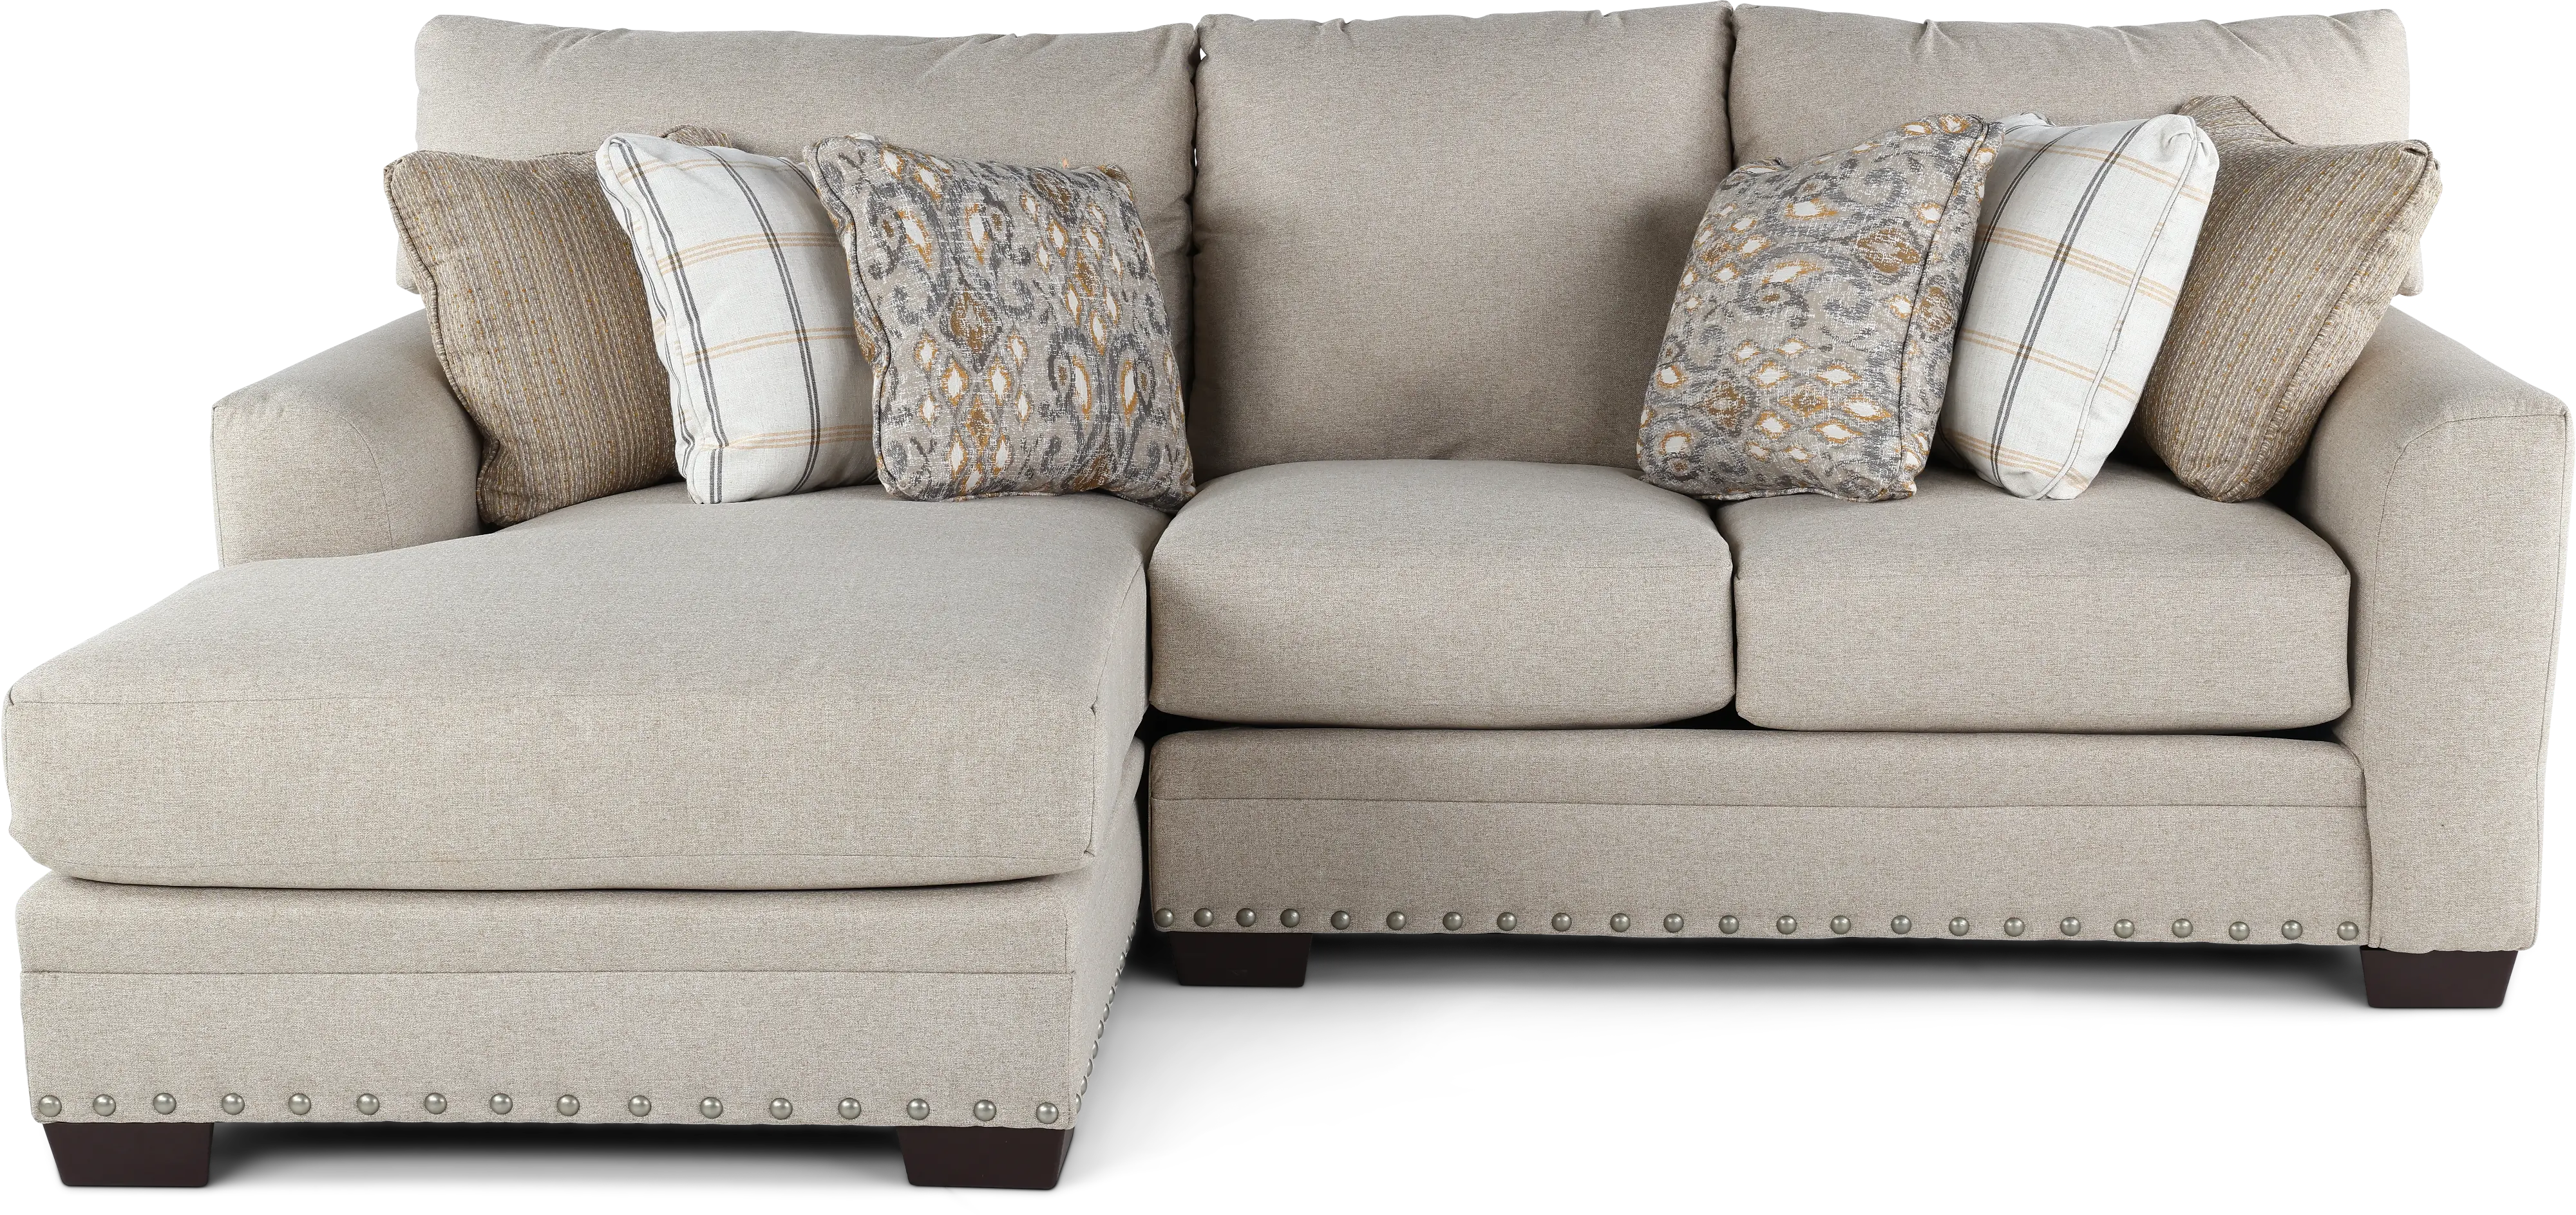 Middleton Beige 2 Piece Chaise Sectional